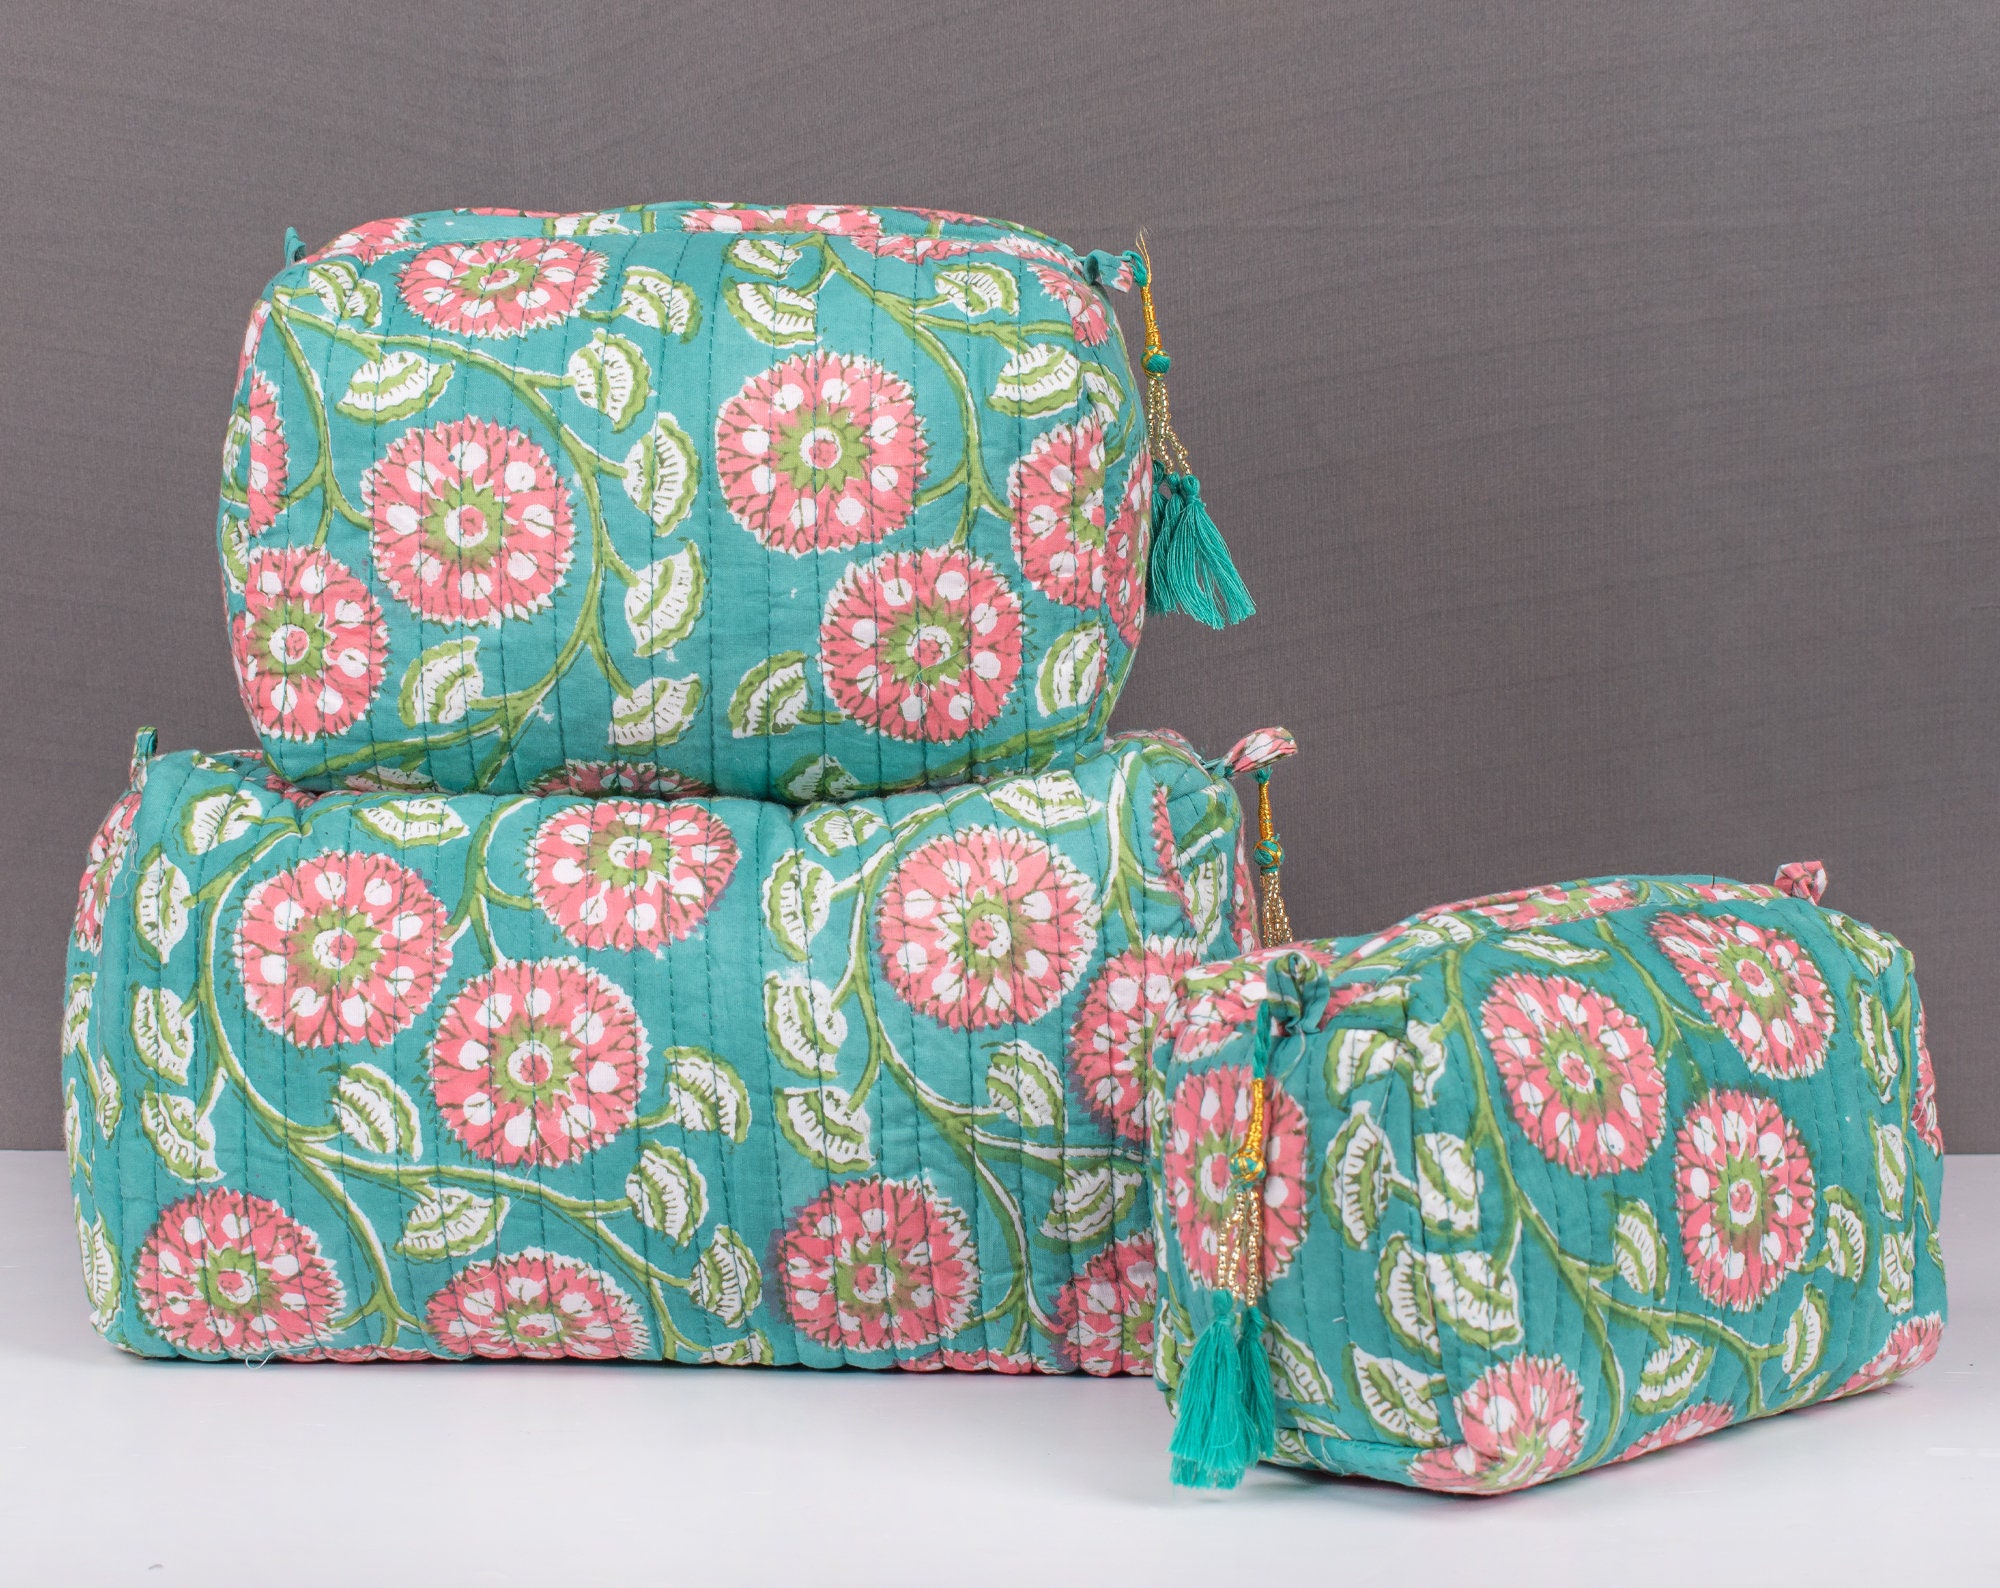 Cotton Quilted Wash Bags,toiletry Bags, Block Printed White Floral